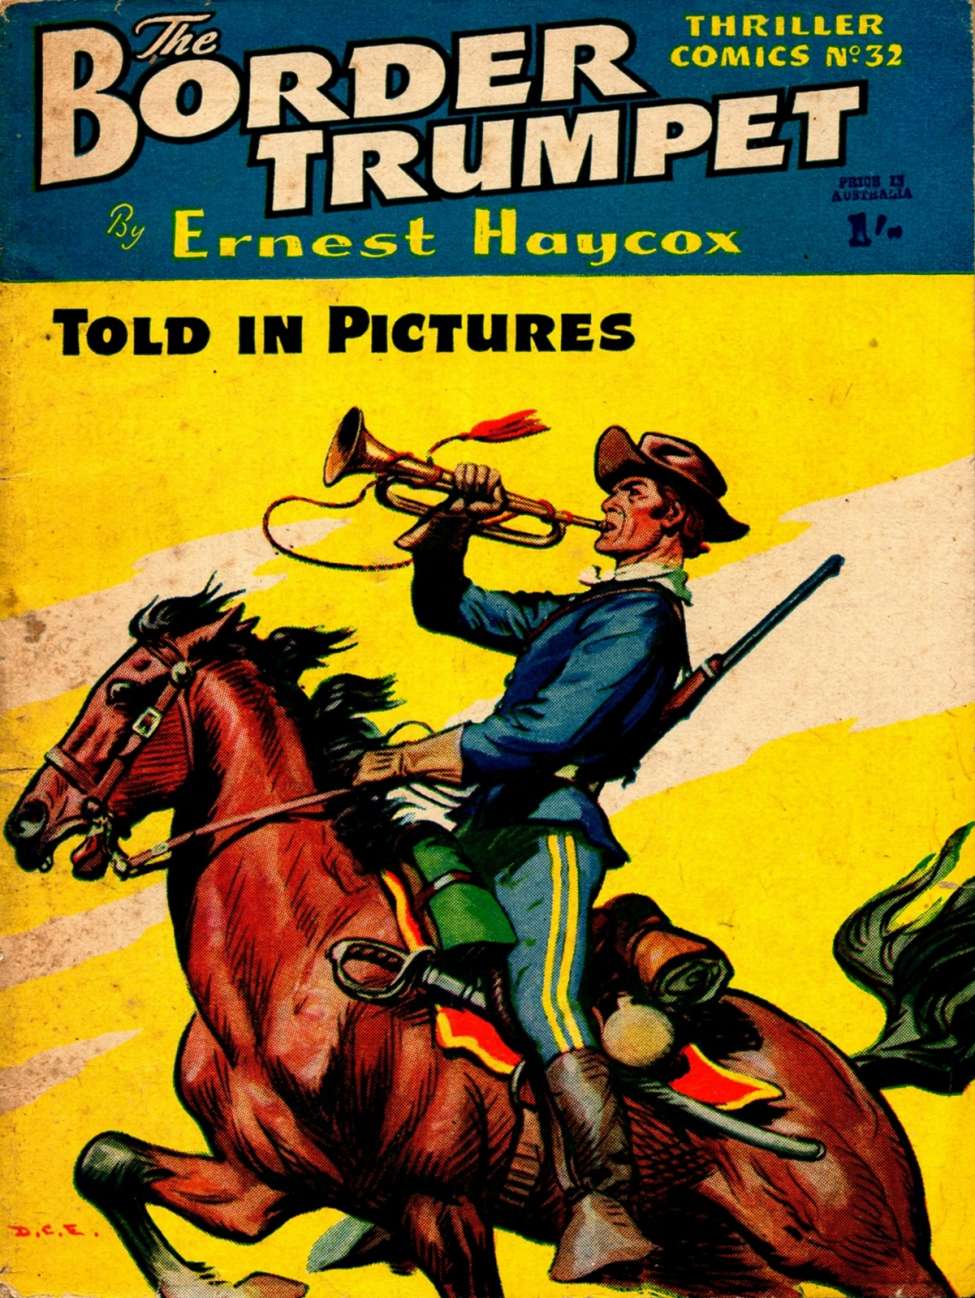 Book Cover For Thriller Comics 32 - The Border Trumpet - Ernest Haycox